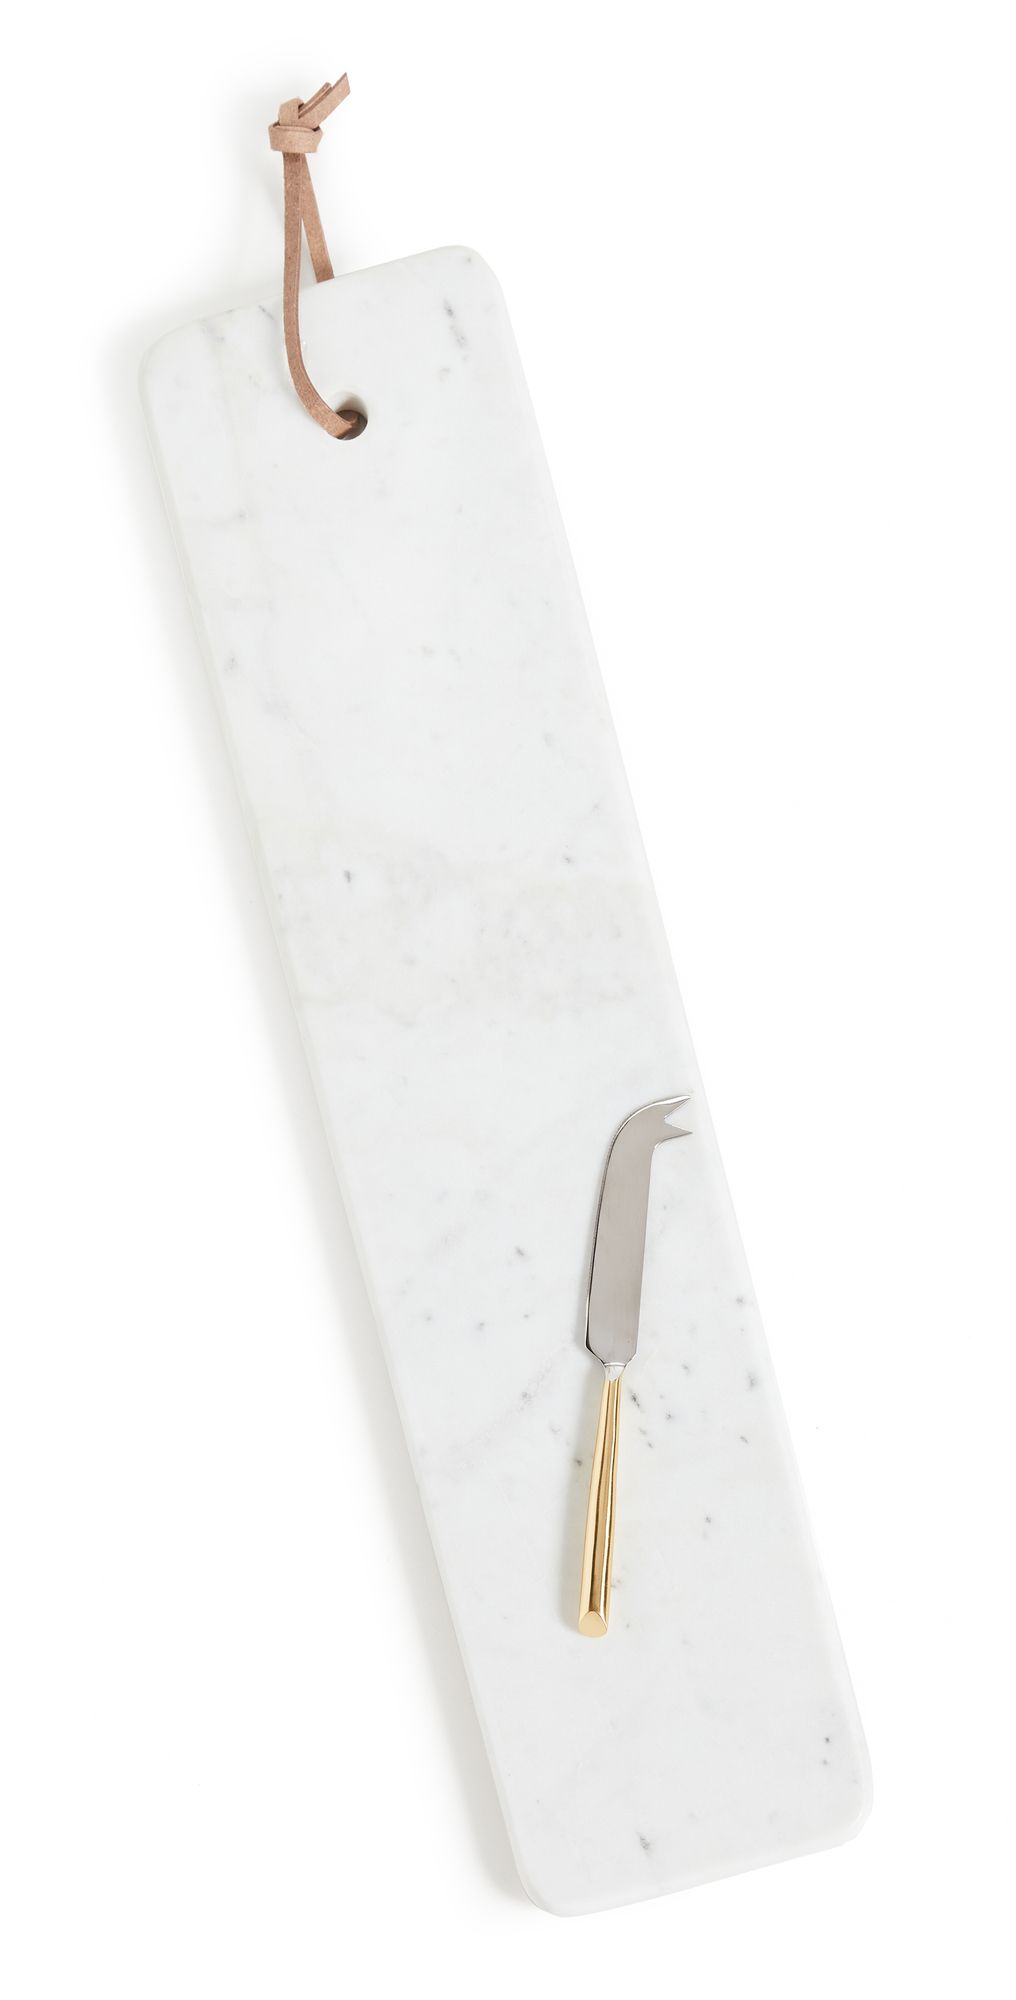 Shopbop @Home Two's Copmany Elongated Solid Marble Serving Tray | Shopbop